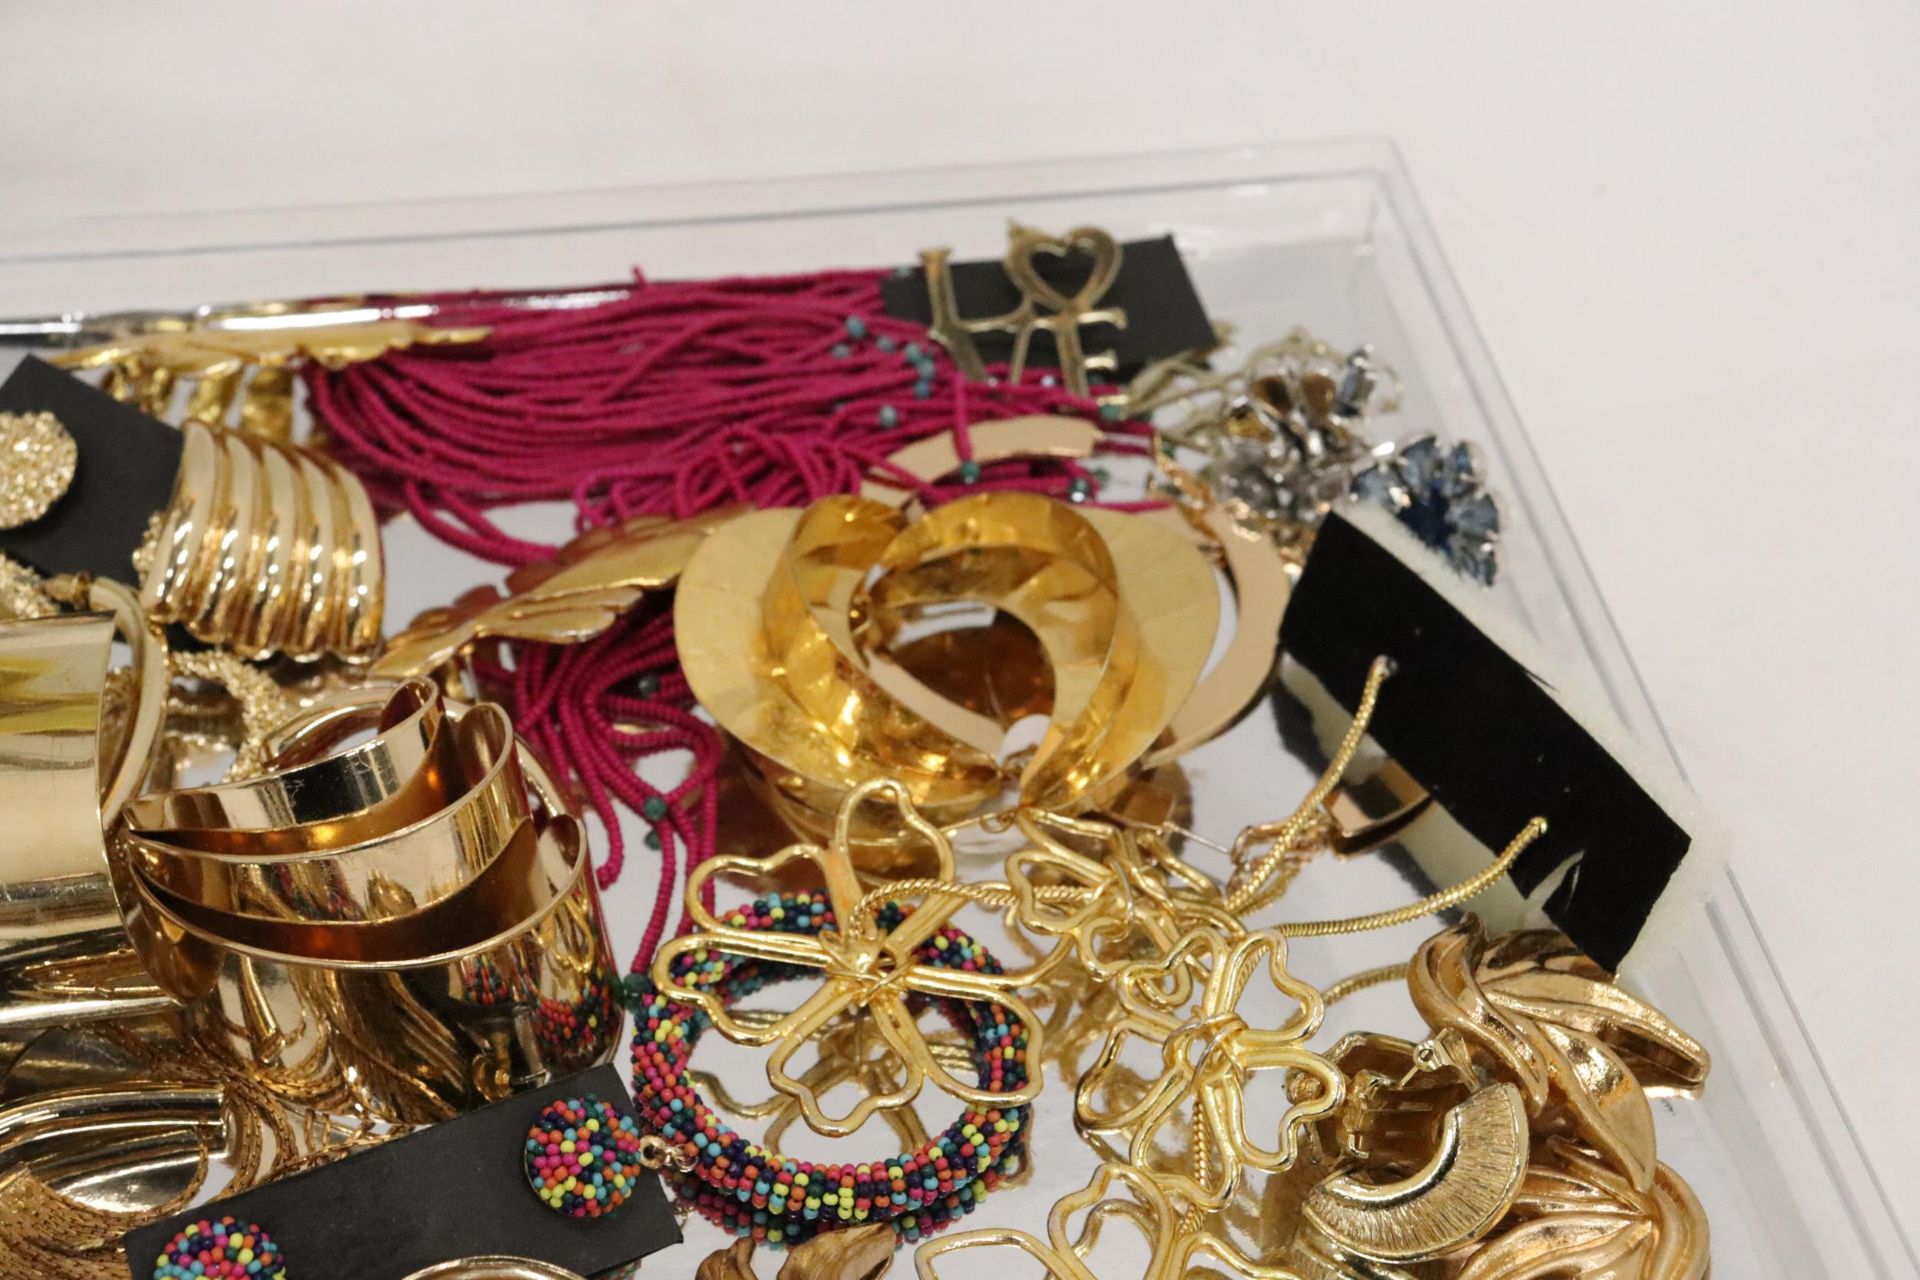 A JEWELLERY STAND WITH A QUANTITY OF NECKLACES PLUS A QUANTITY OF EARRINGS - Image 7 of 8